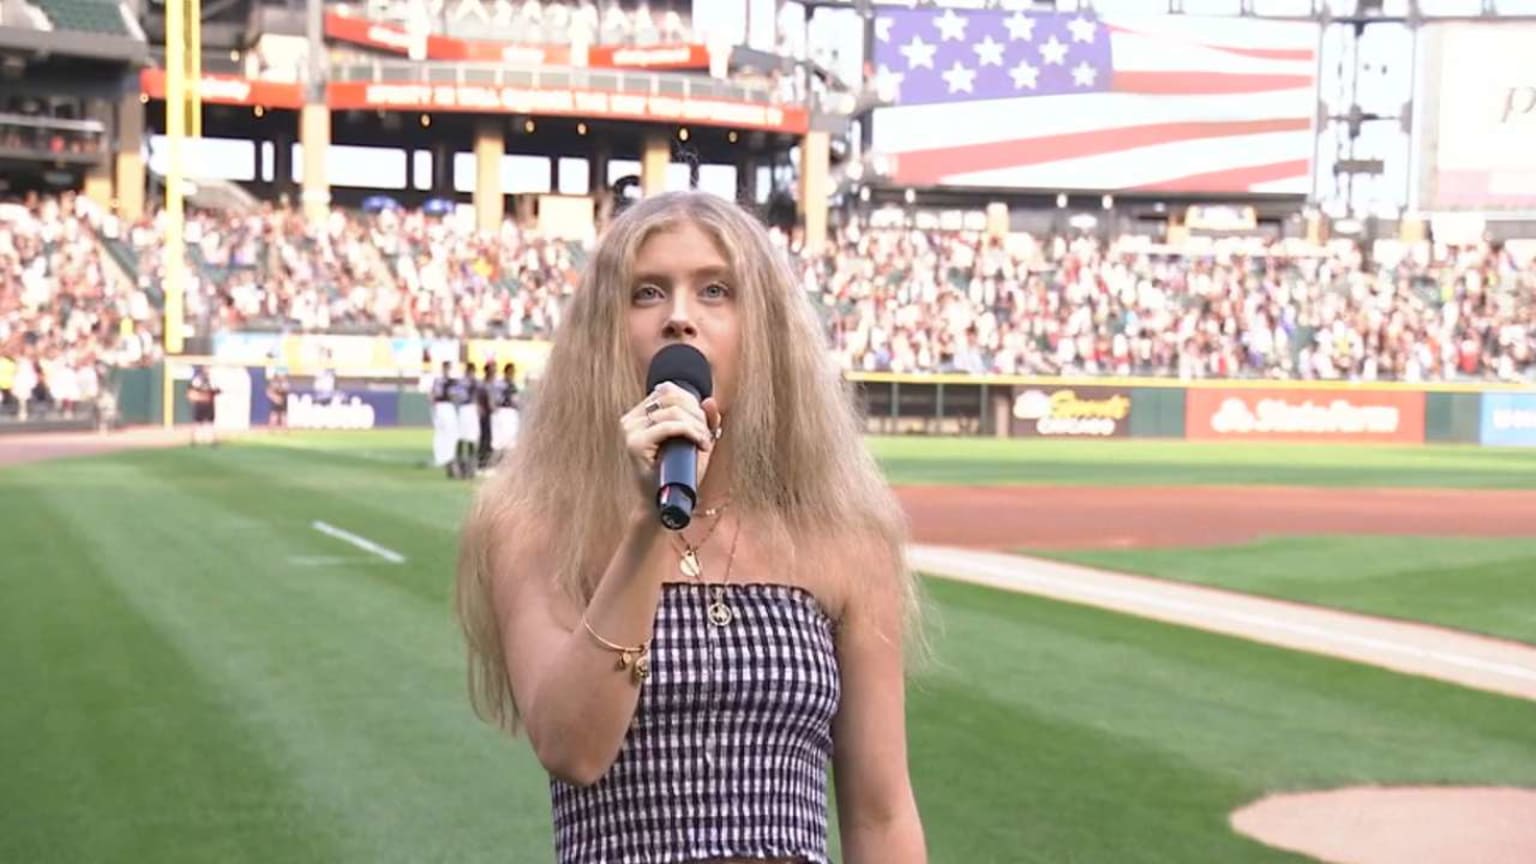 Jim Thome's daughter Lila wows during 'God Bless America' performance